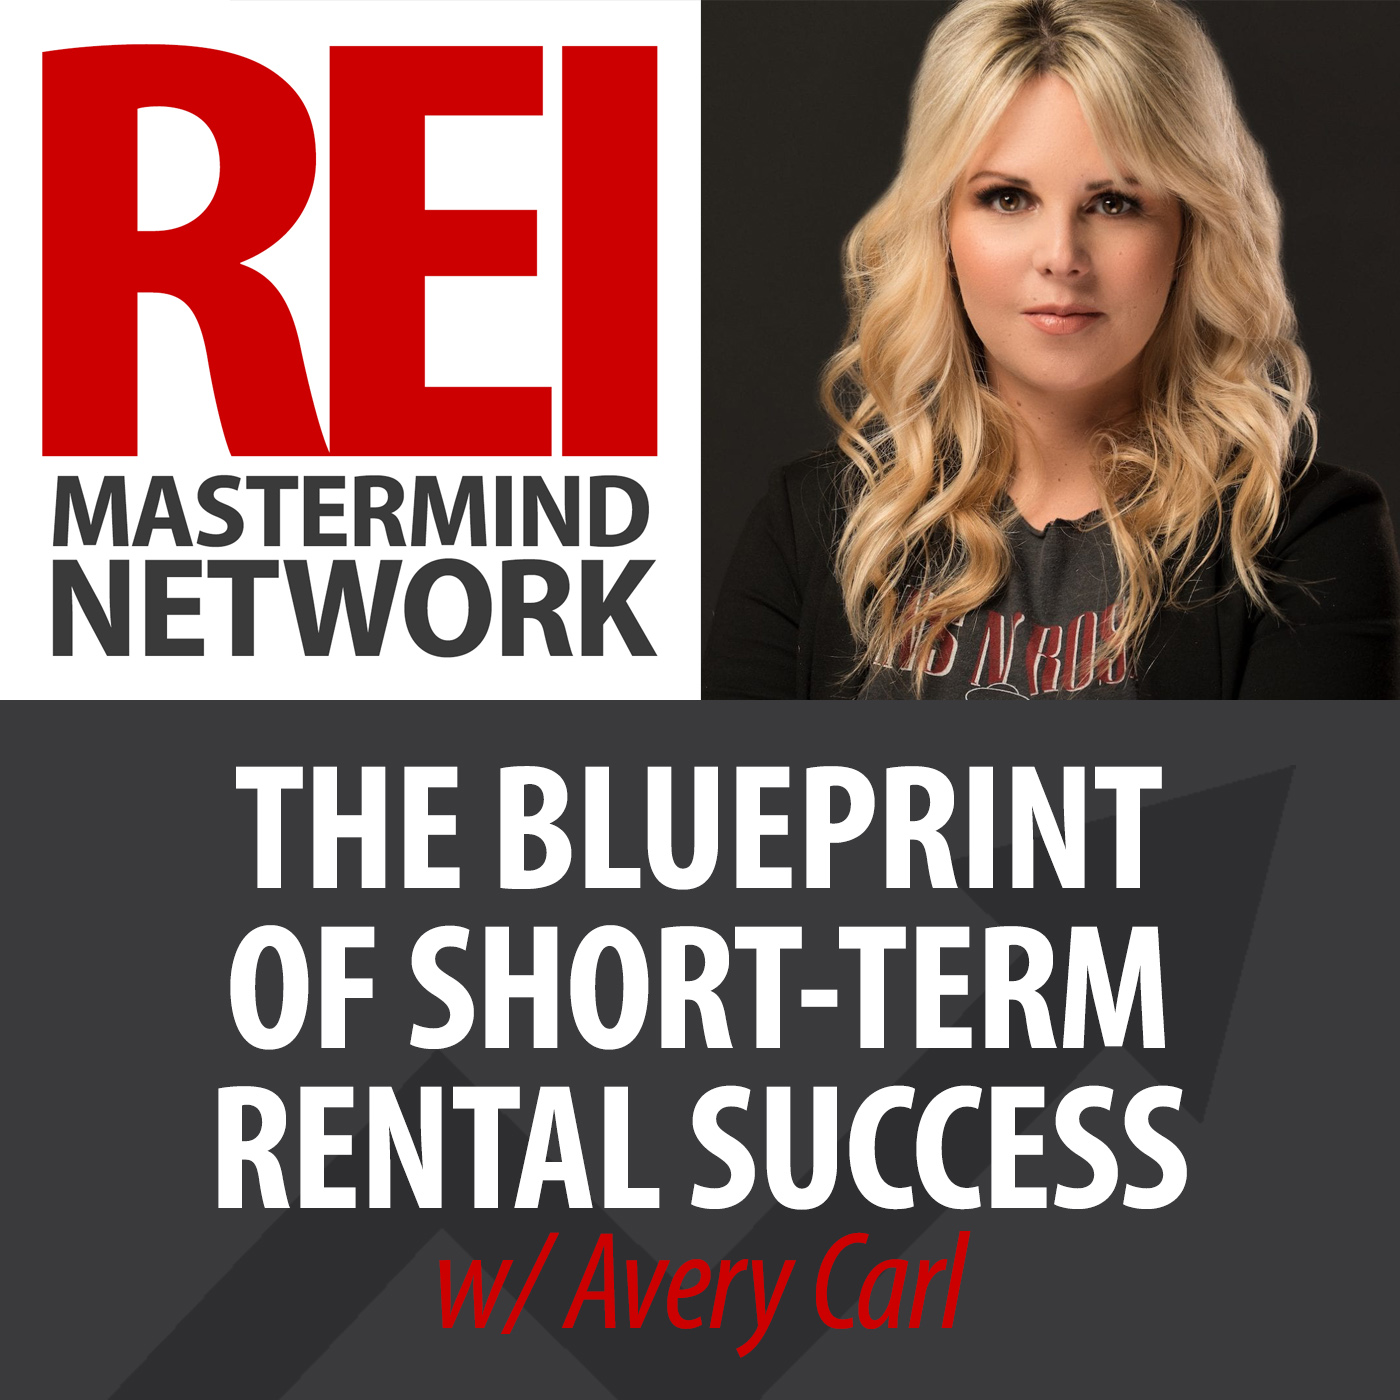 The Blueprint of Short-Term Rental Success with Avery Carl